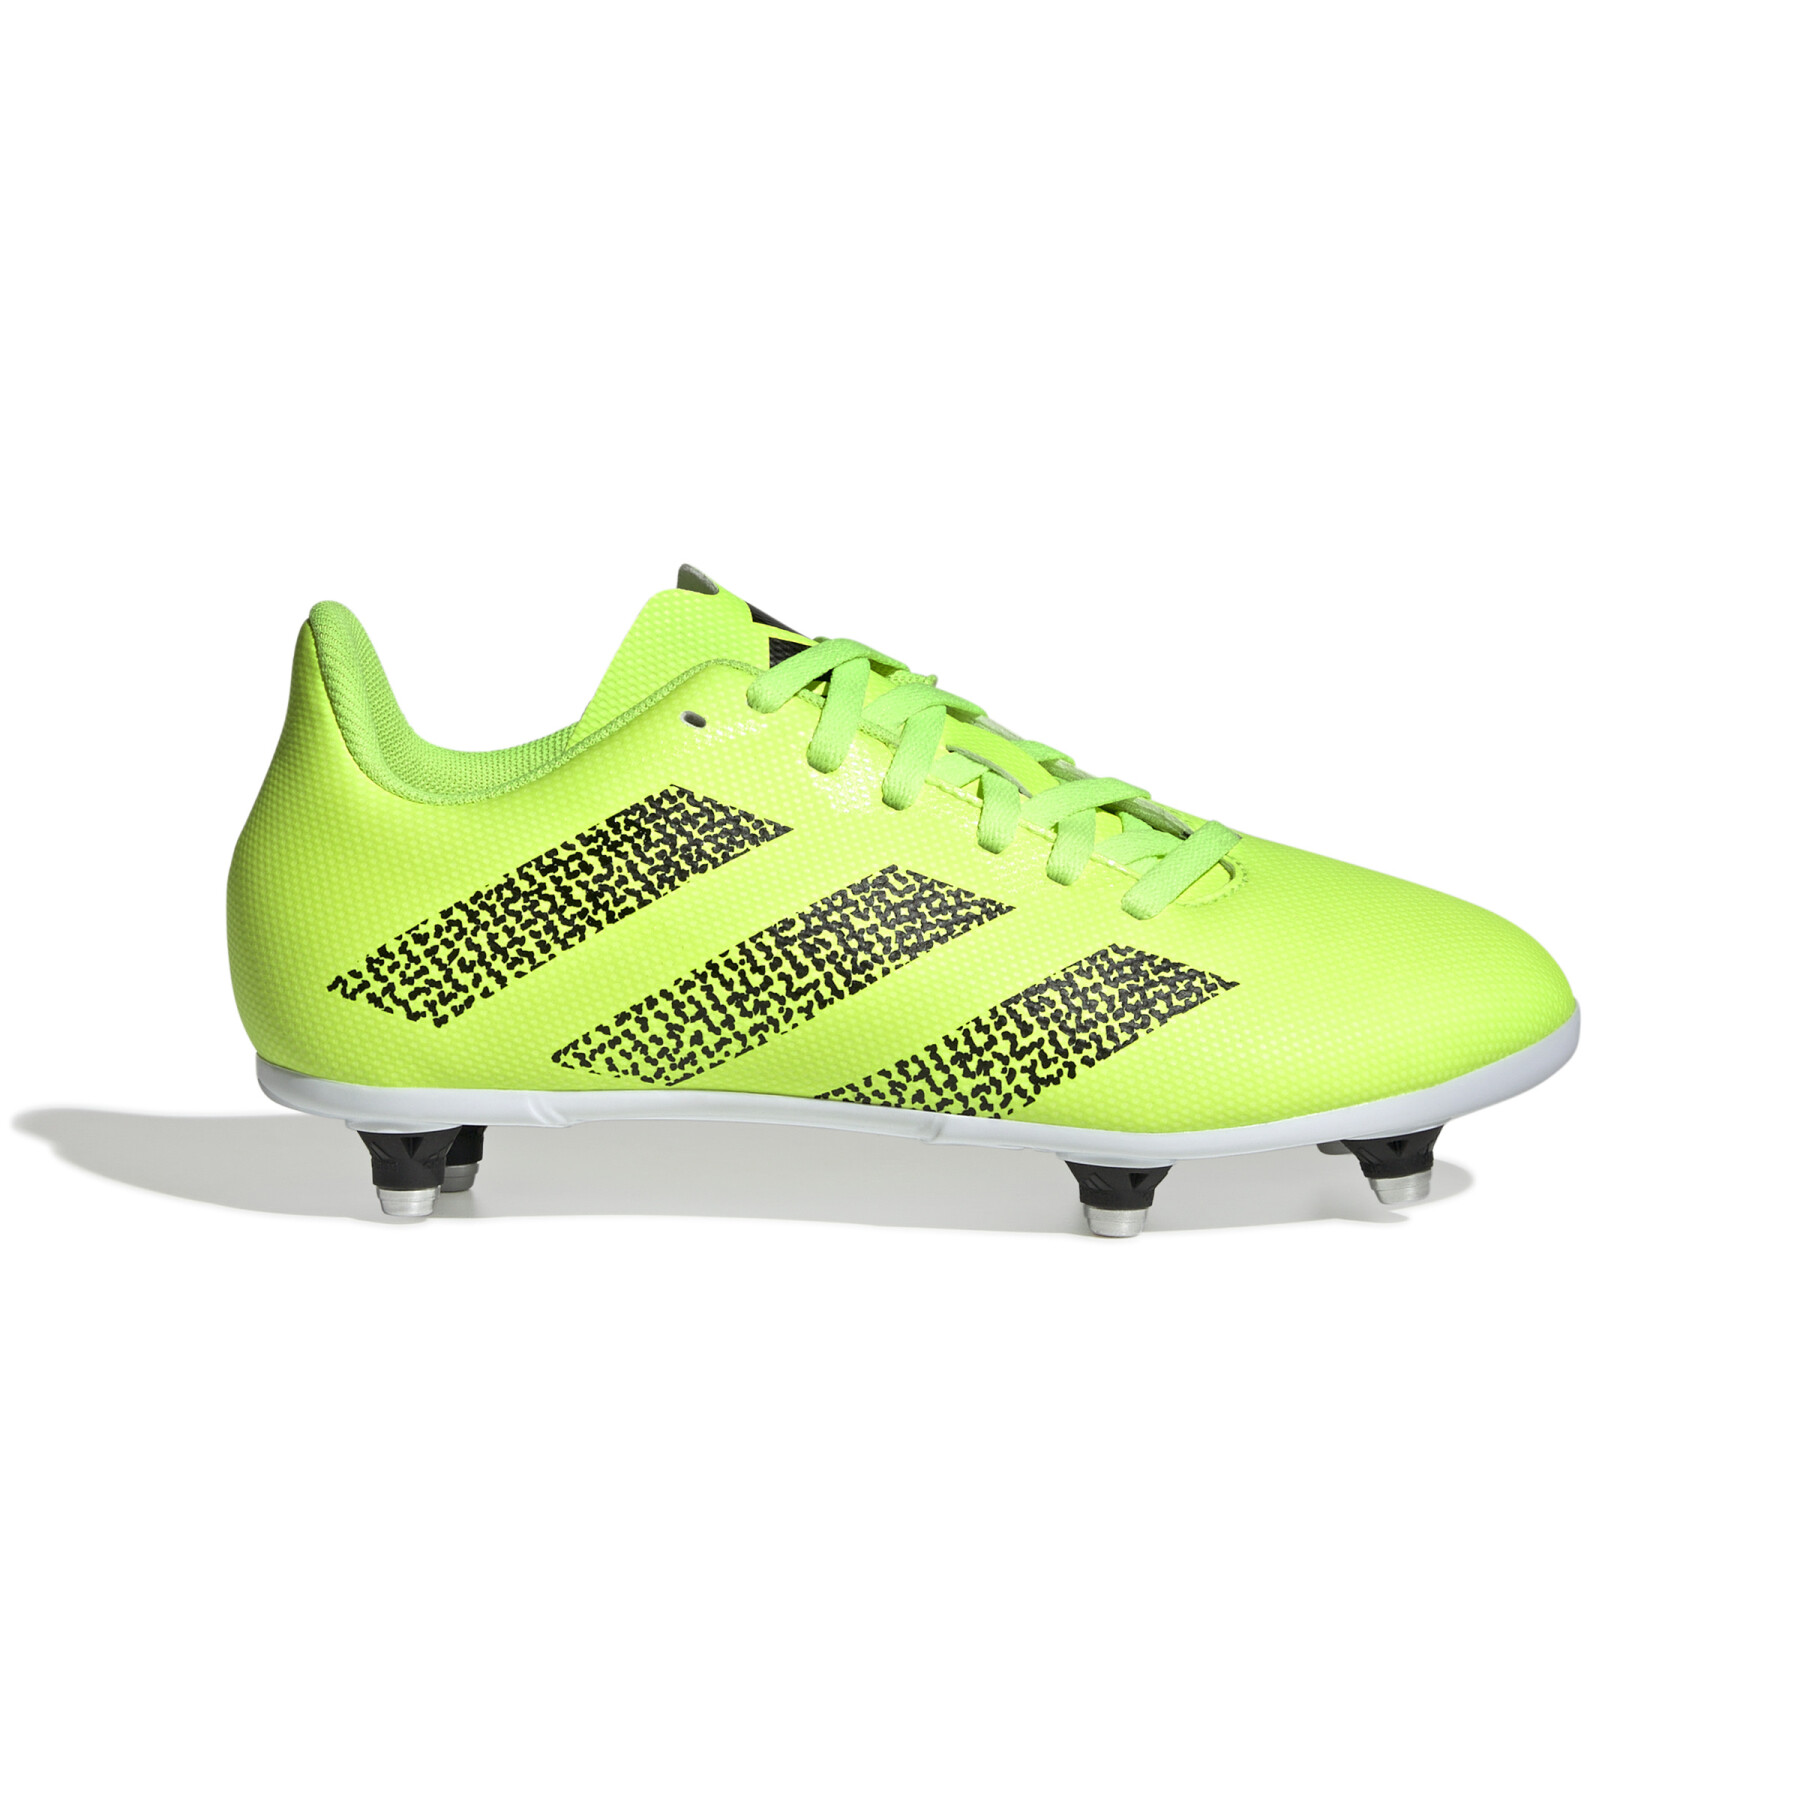 Kids rugby shoes adidas Junior SG